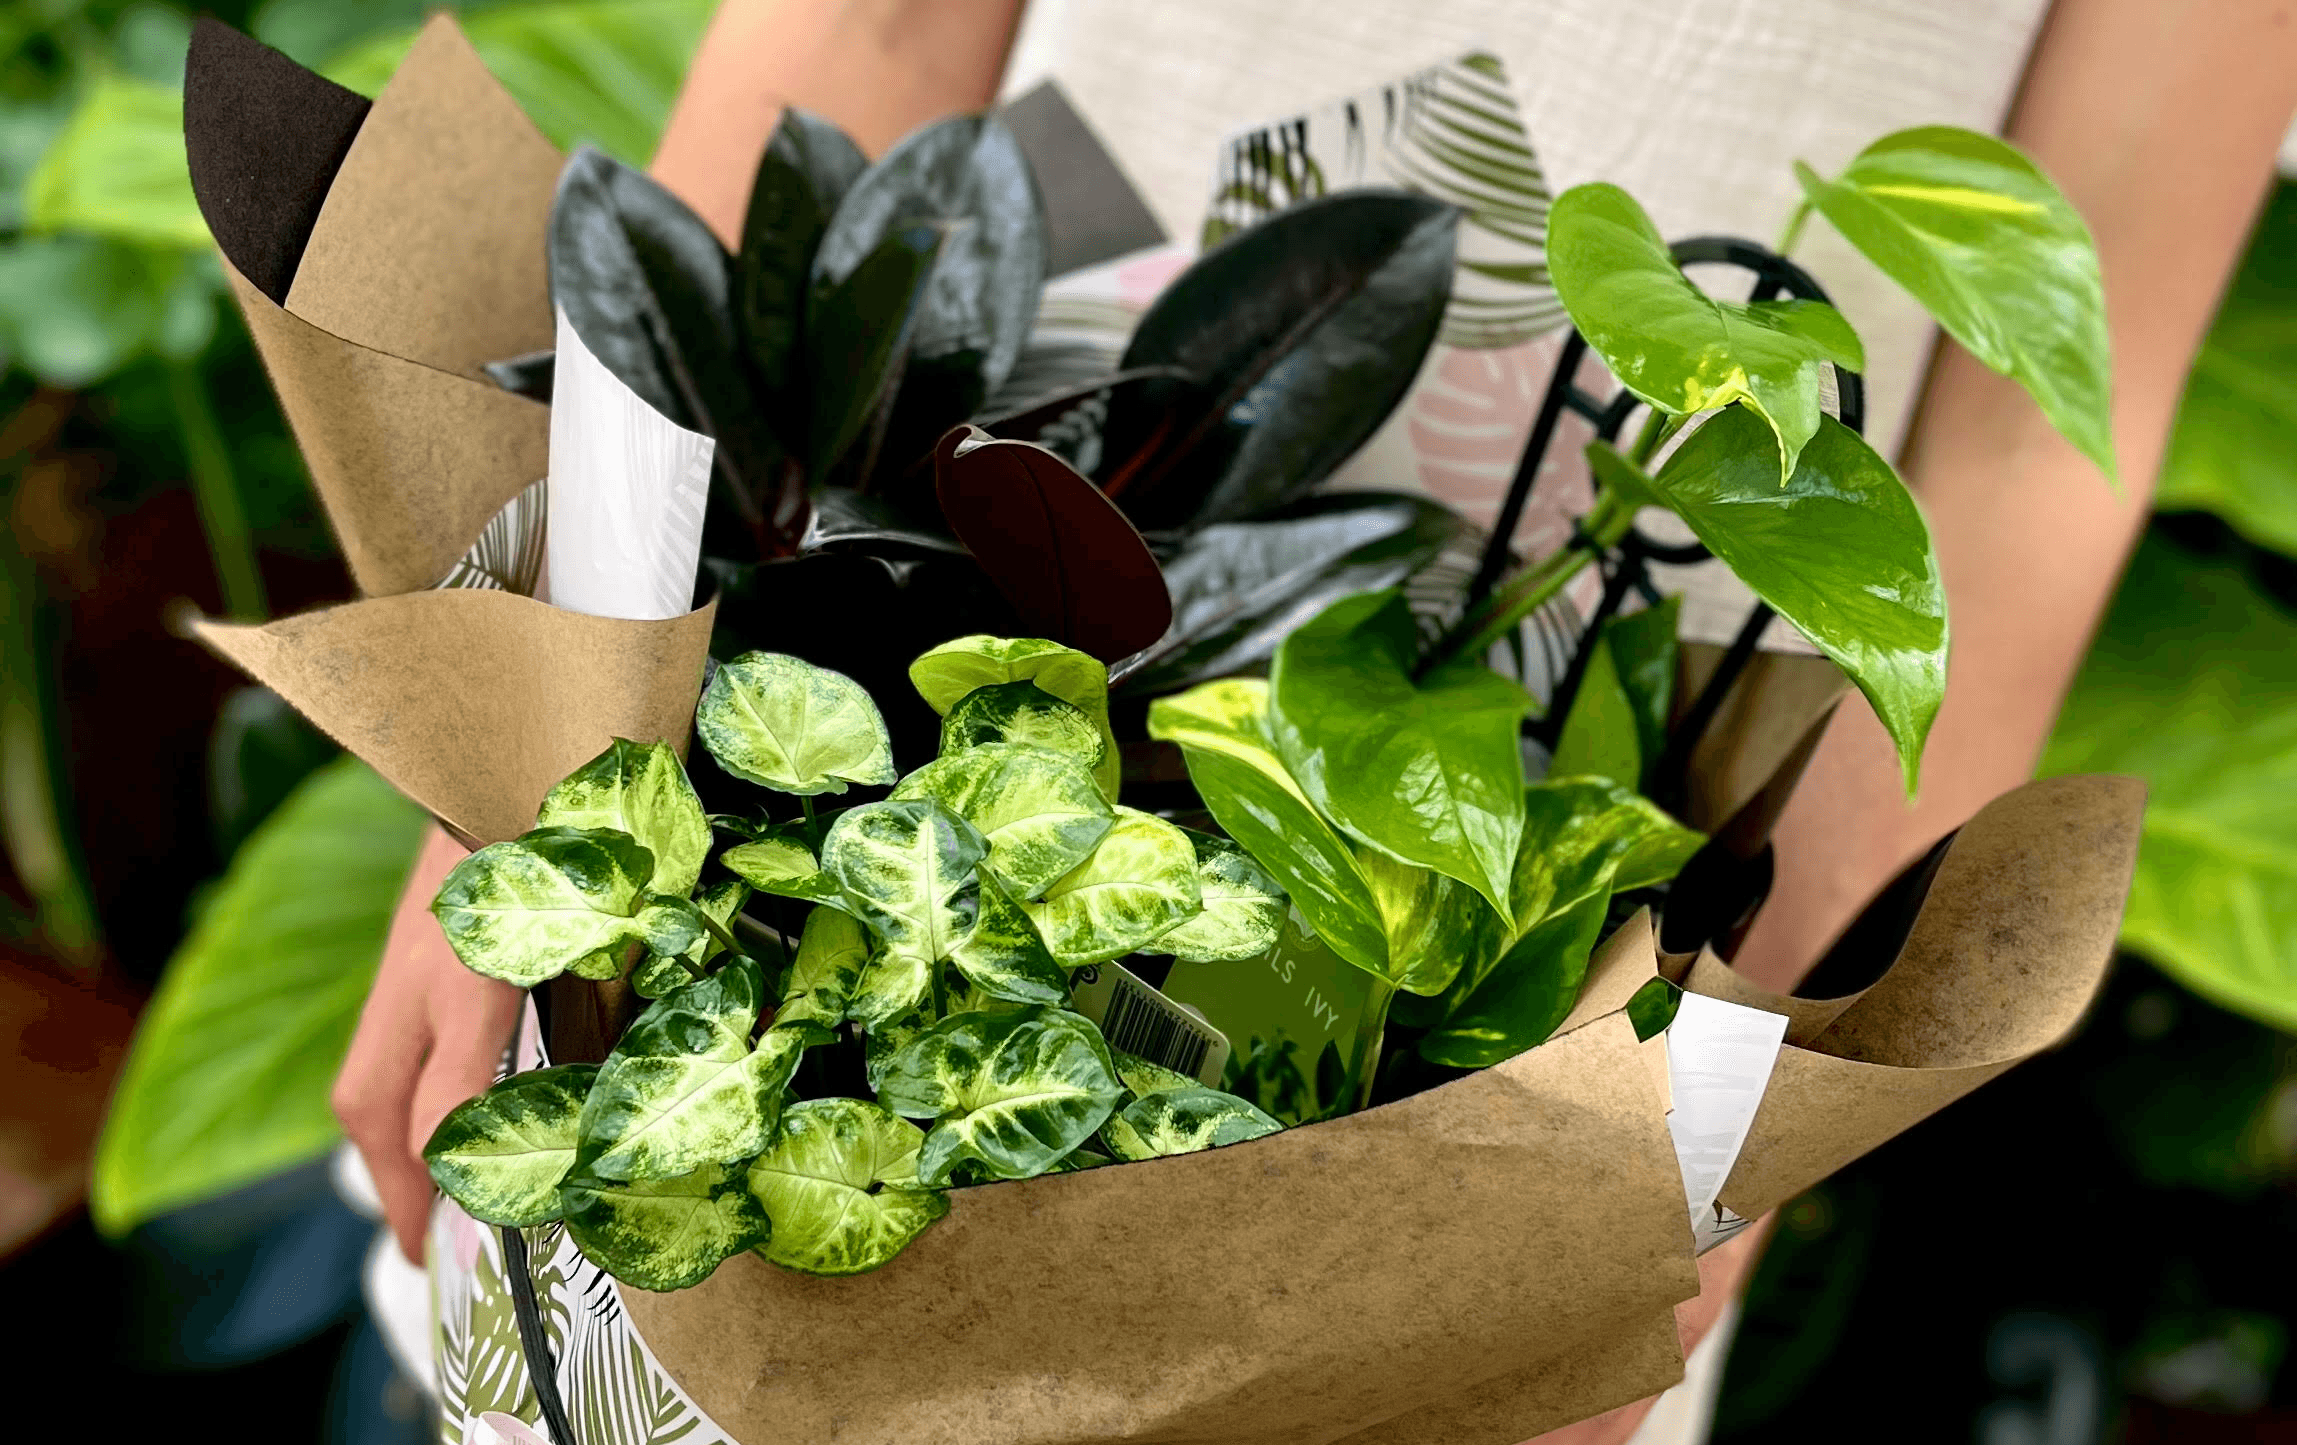 Looking for flower delivery in Melbourne? Look no further than flowers and plants from Indoor Plant Co.